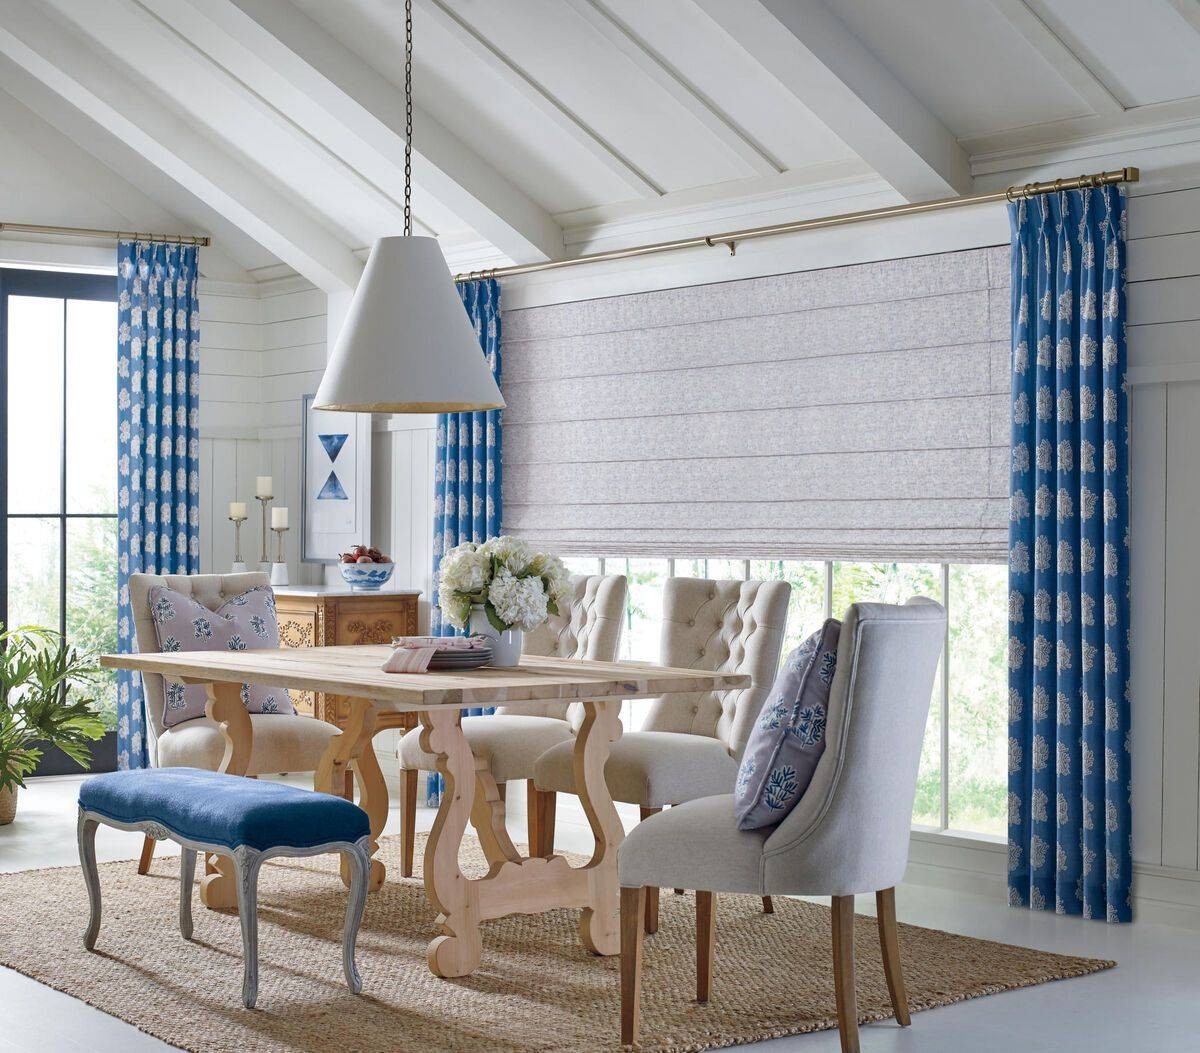 Dining room with dark blue Hunter Douglas drapery and shades covering a long window